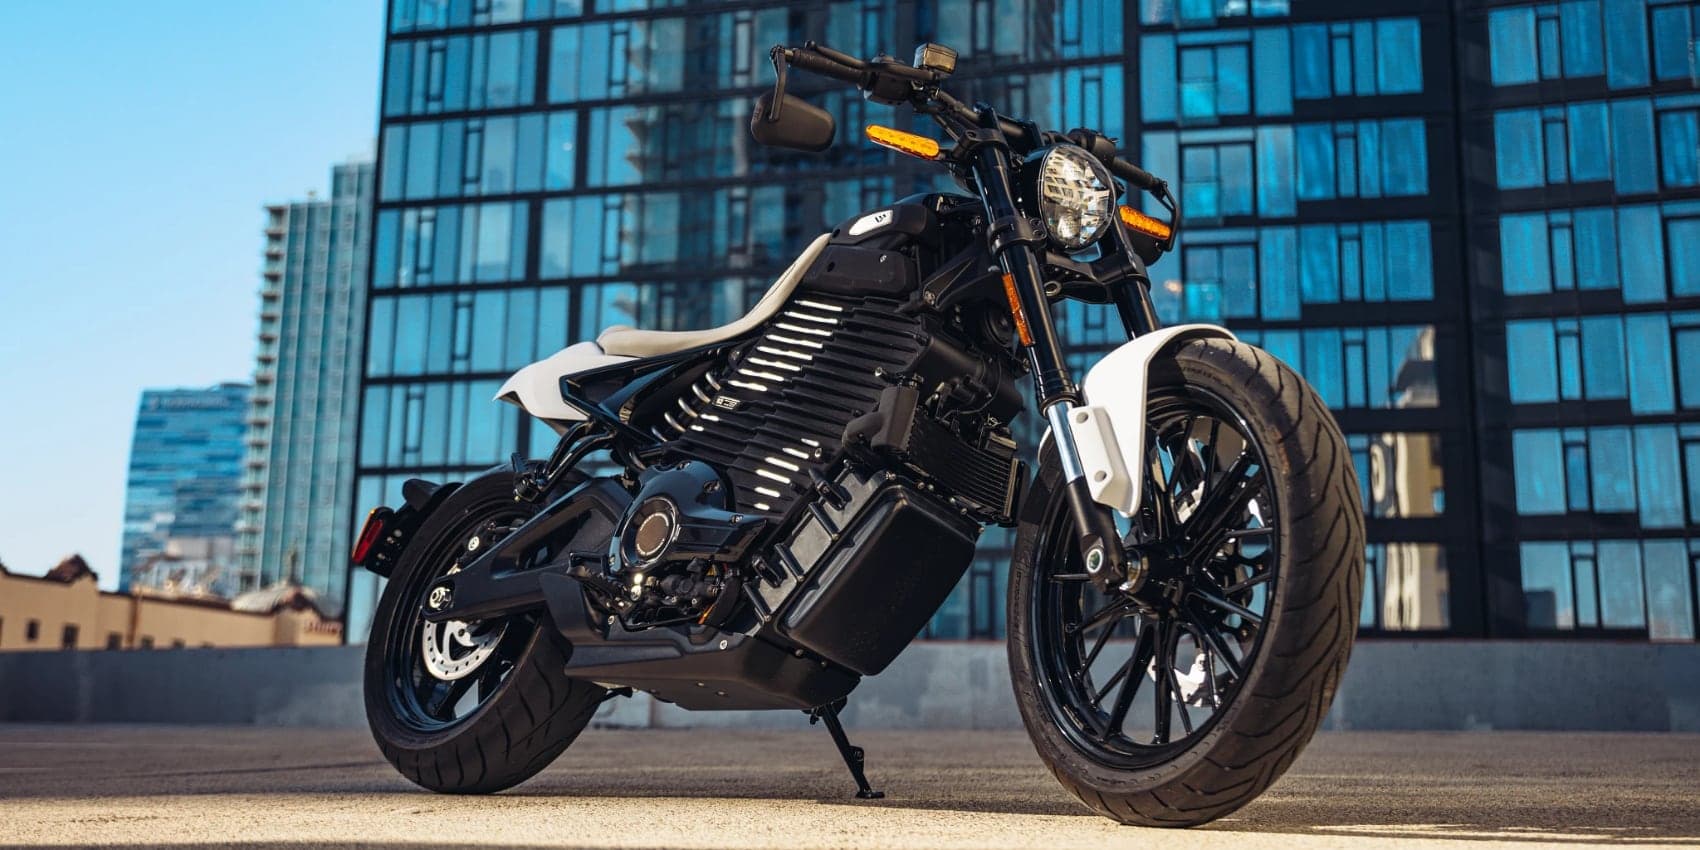 Harley-Davidson’s LiveWire launches first electric cruiser motorcycle, S2 Mulholland – Electrek